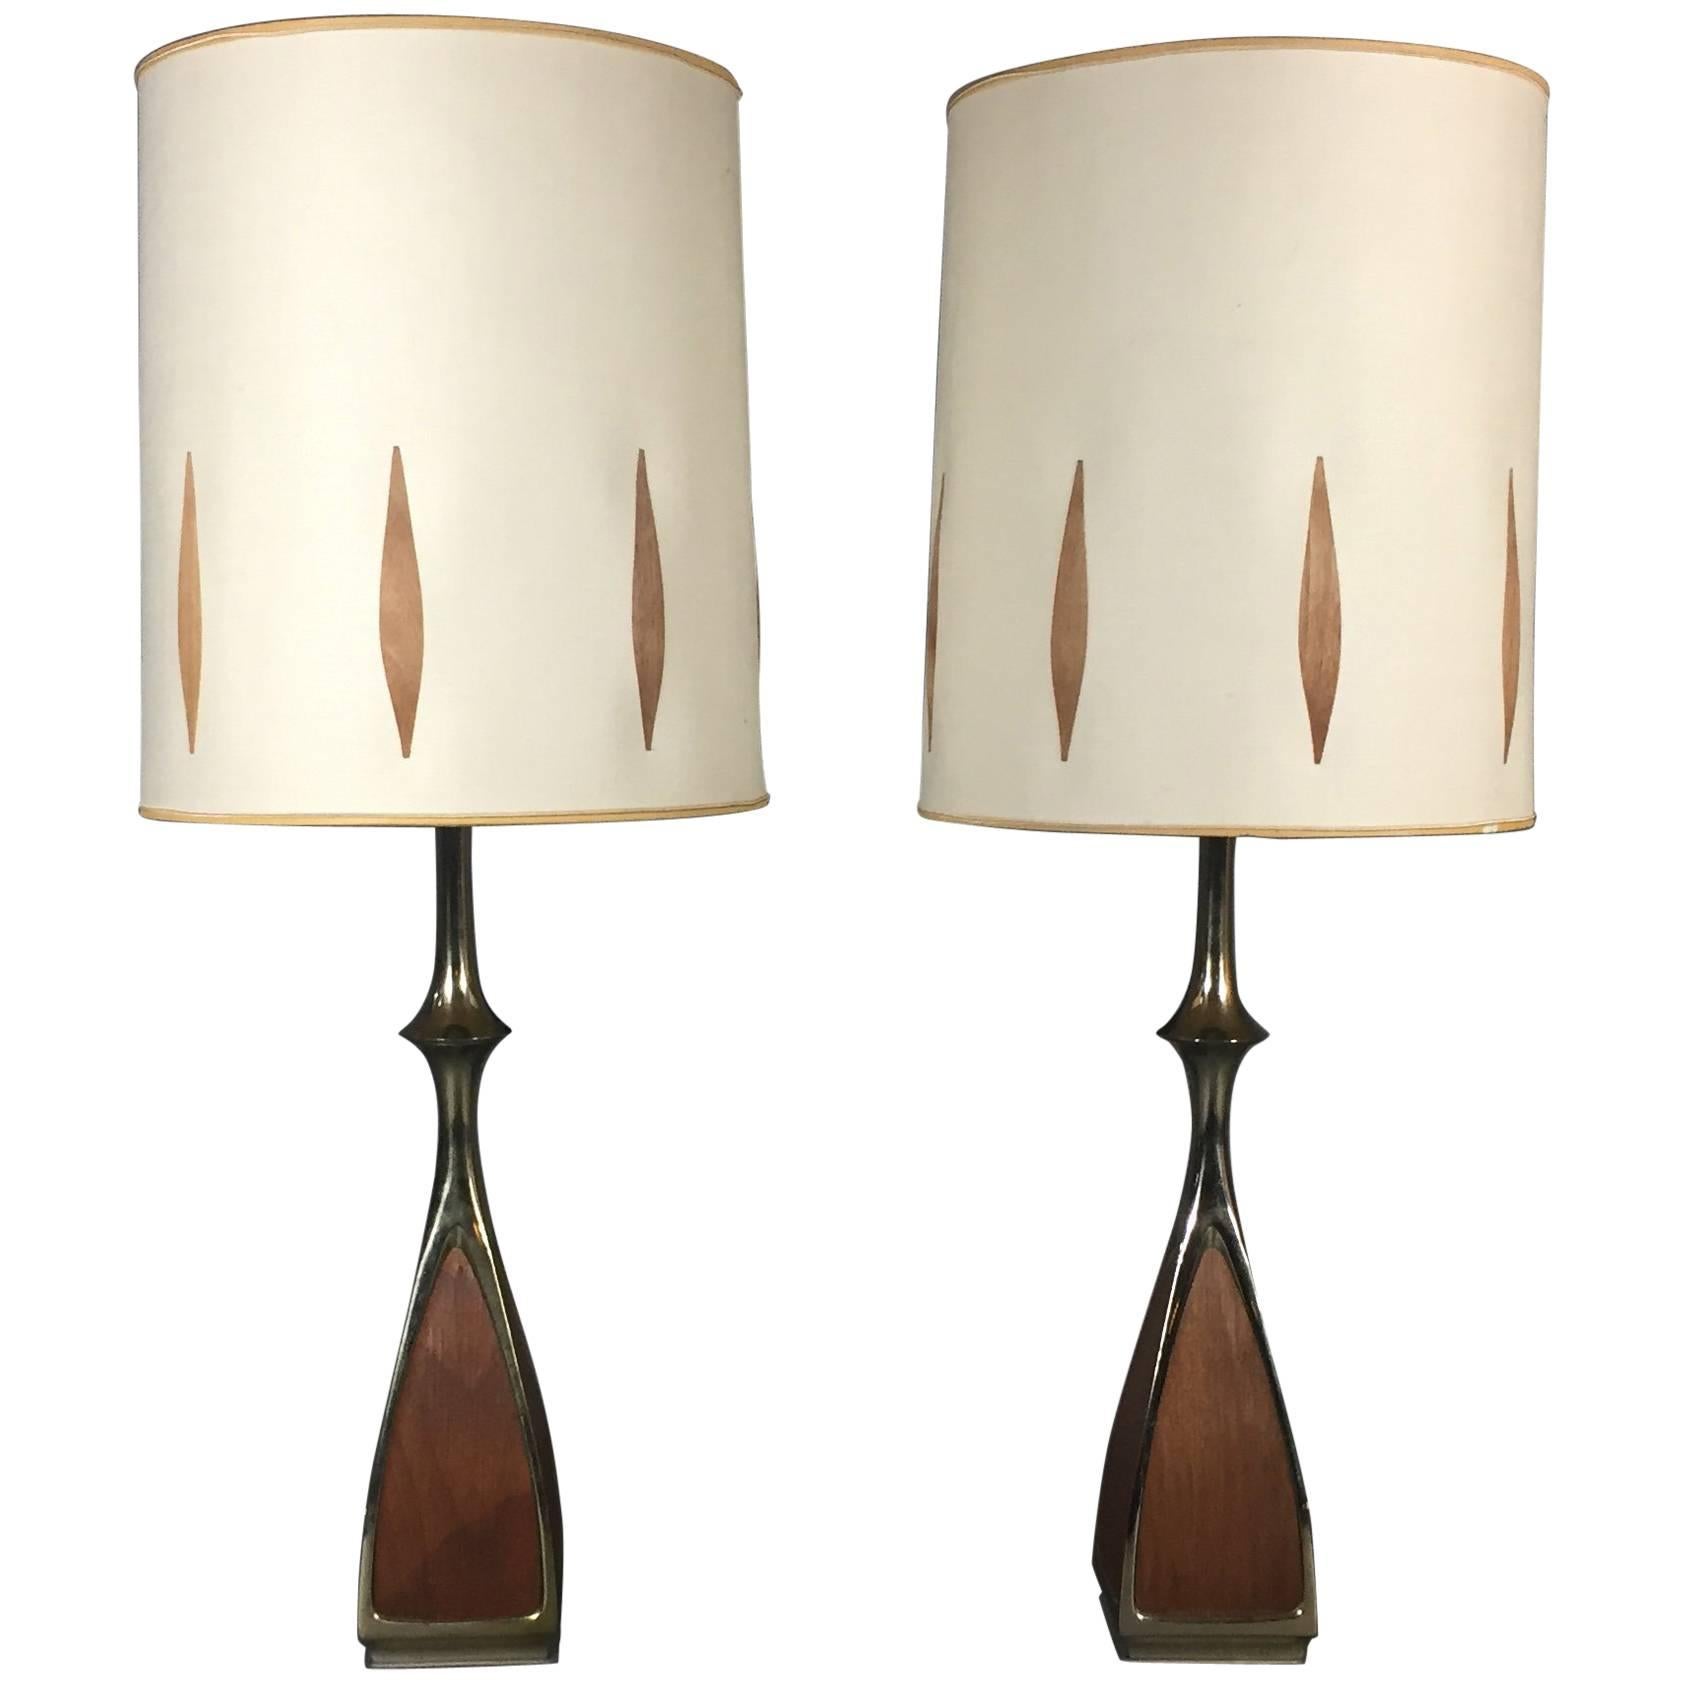 Pair of 1960s Laurel Lamps, Walnut and Brass, Original Shades, USA